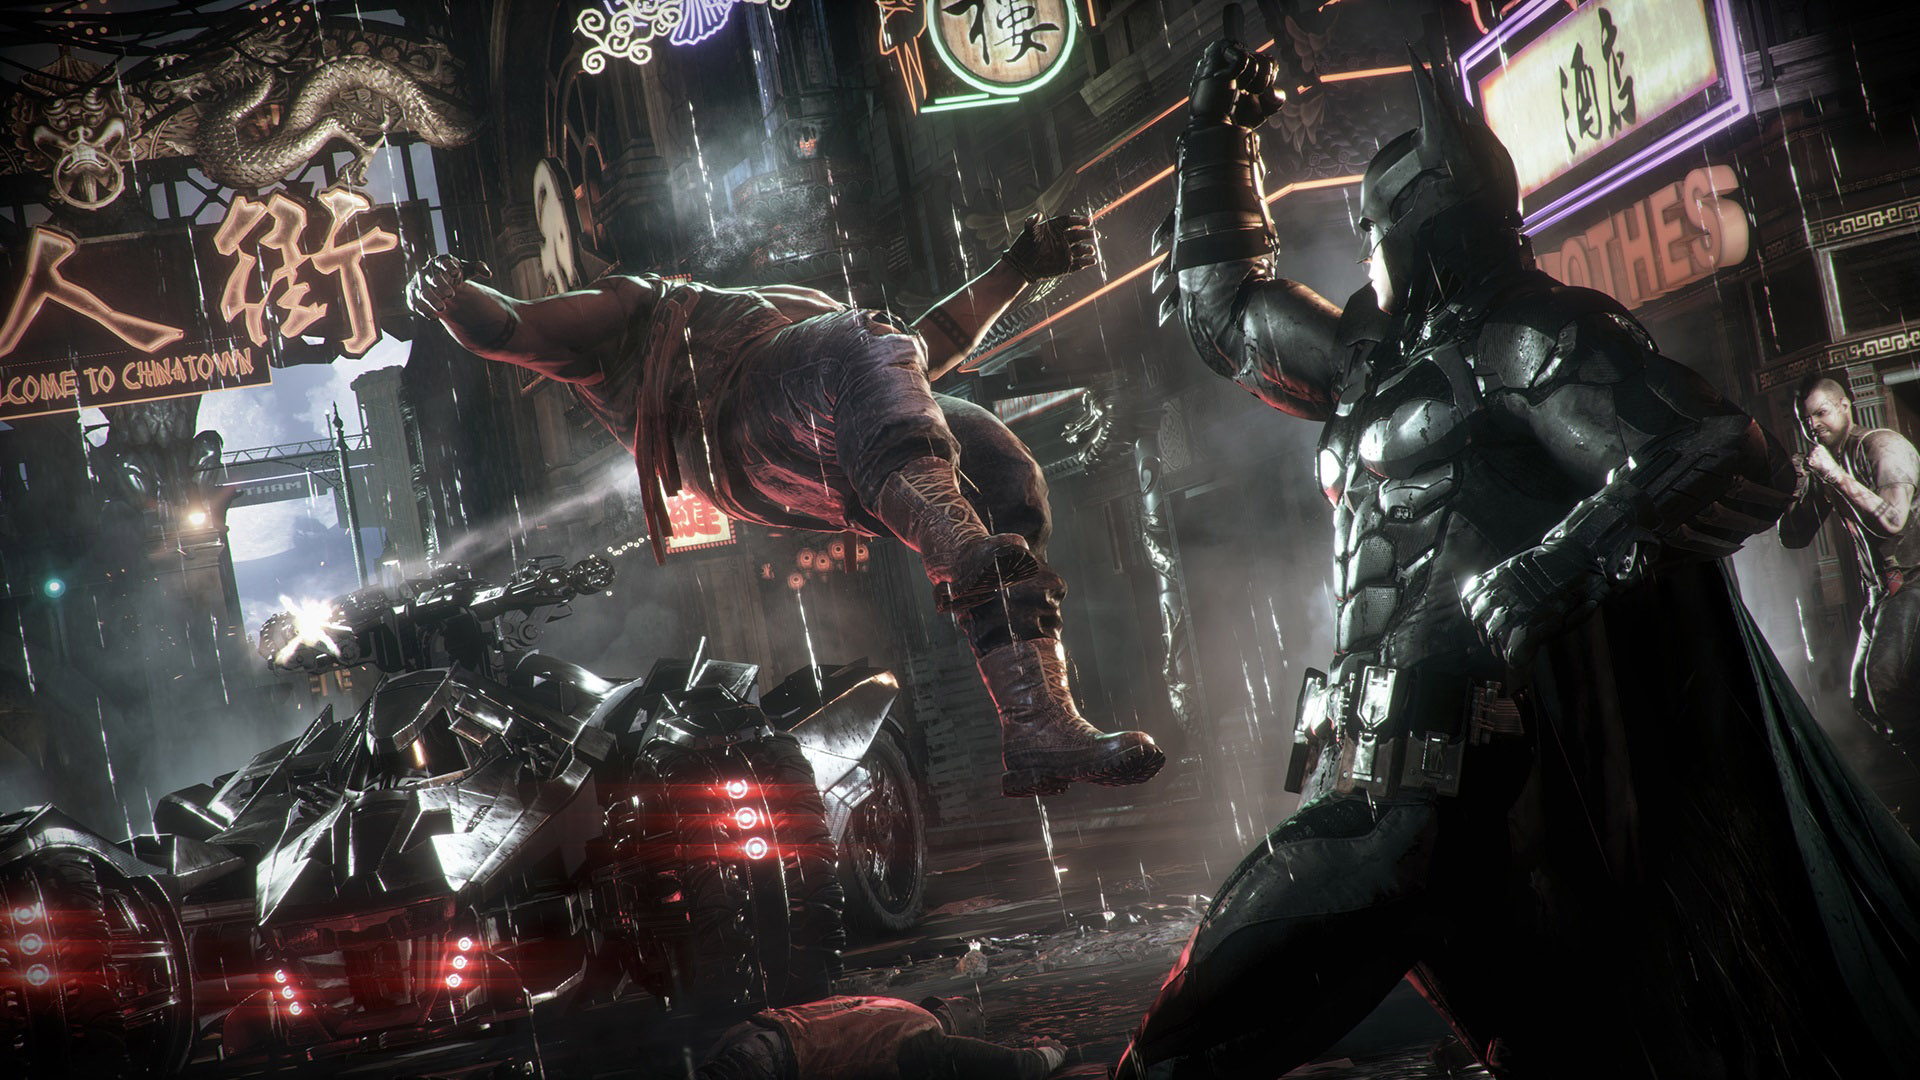 PlayStation Now Adds Batman: Arkham Knight and Metal Gear Rising